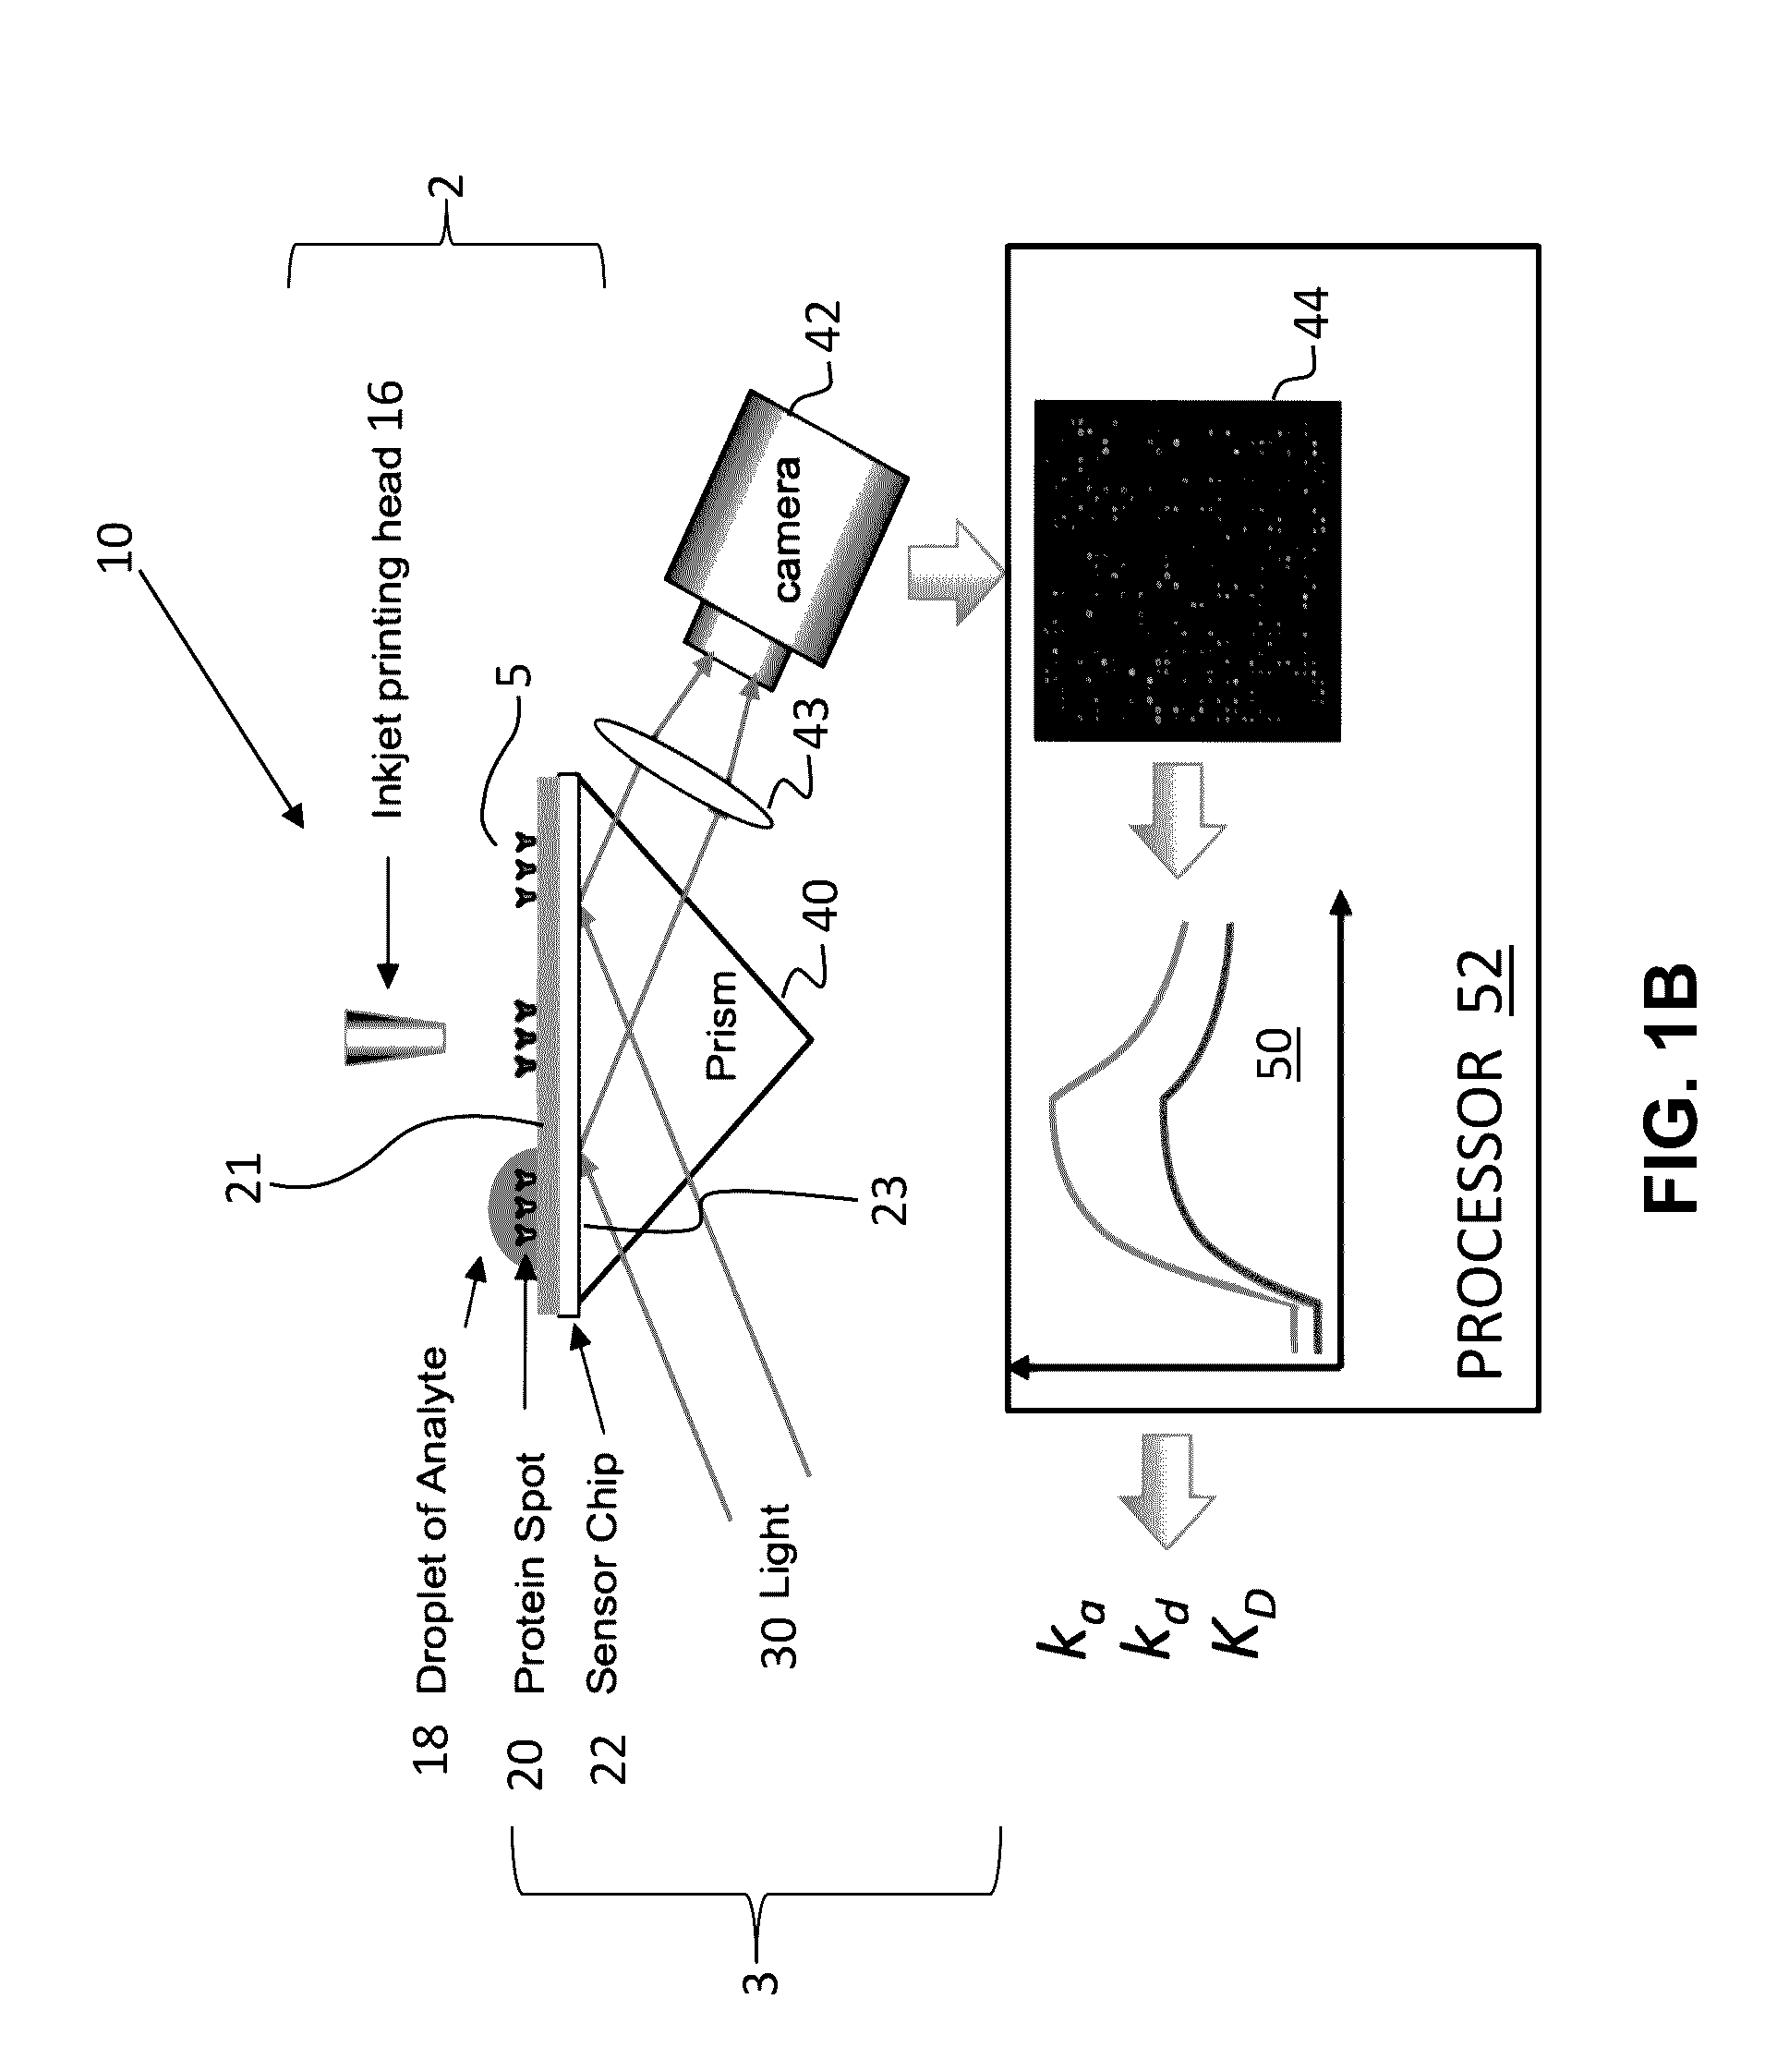 Integrated microarray printing and detection system for molecular binding analysis